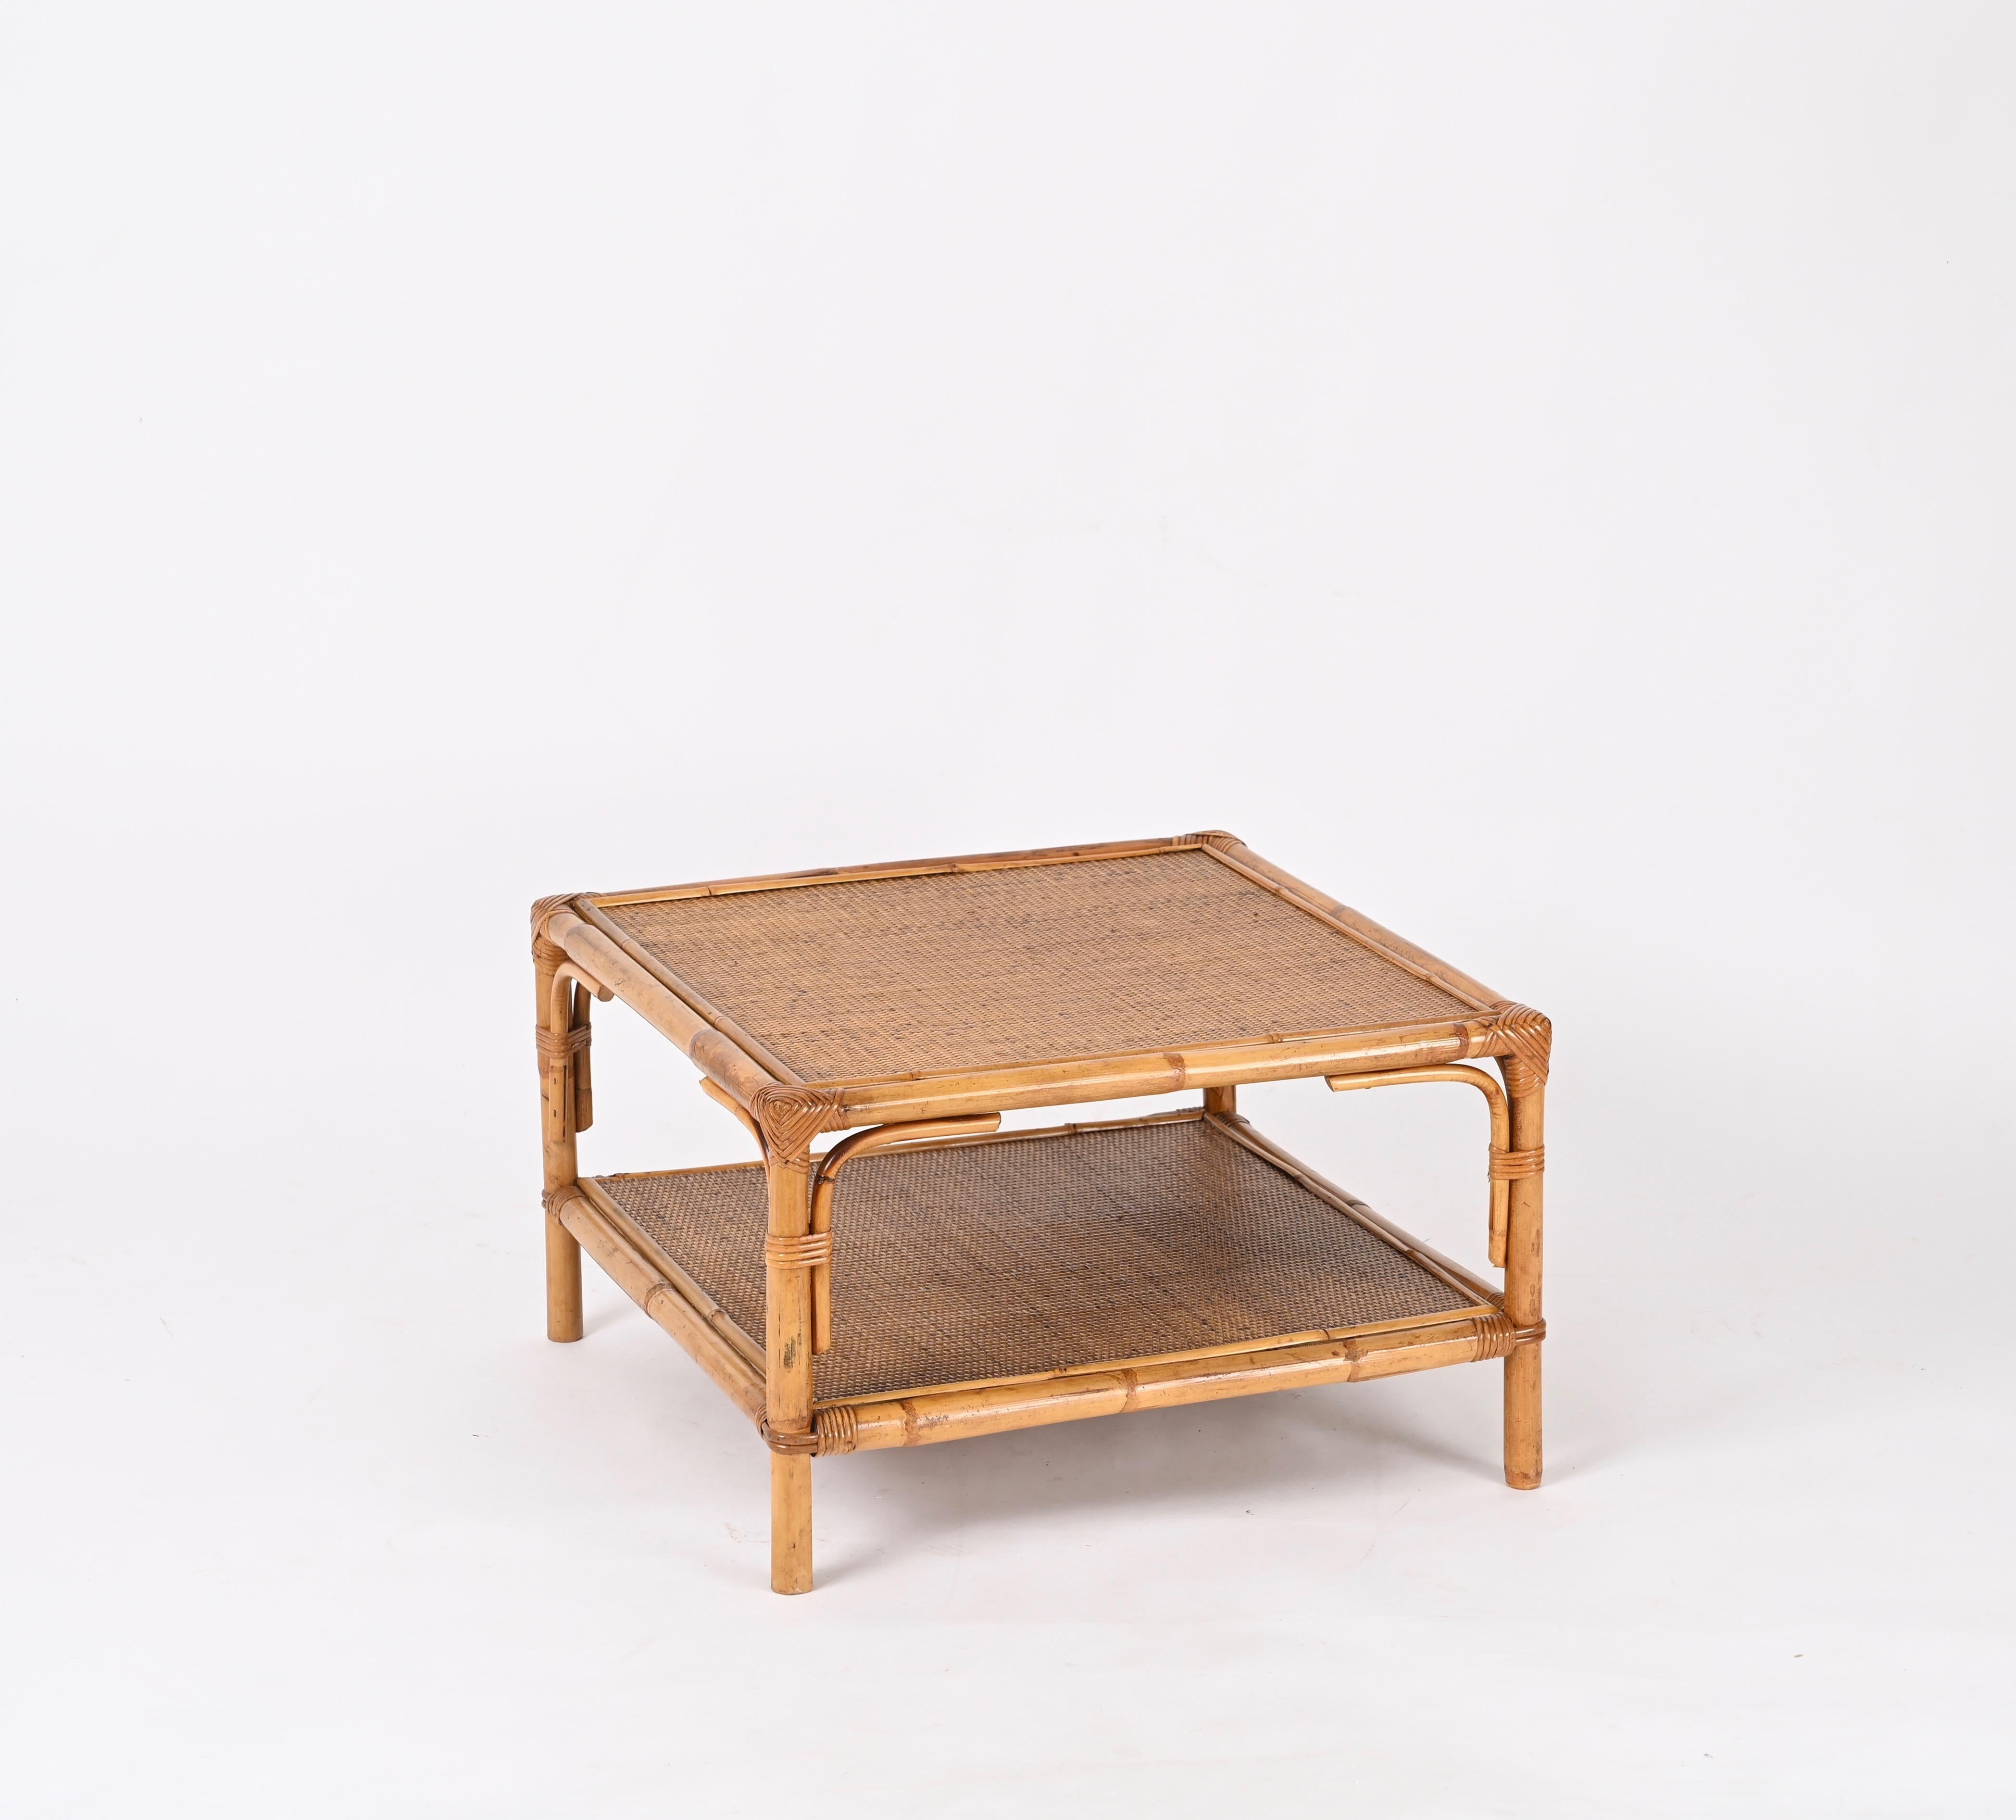 Vivai del Sud Midcentury Italian Square Coffee Table in Bamboo and Rattan, 1970s For Sale 1